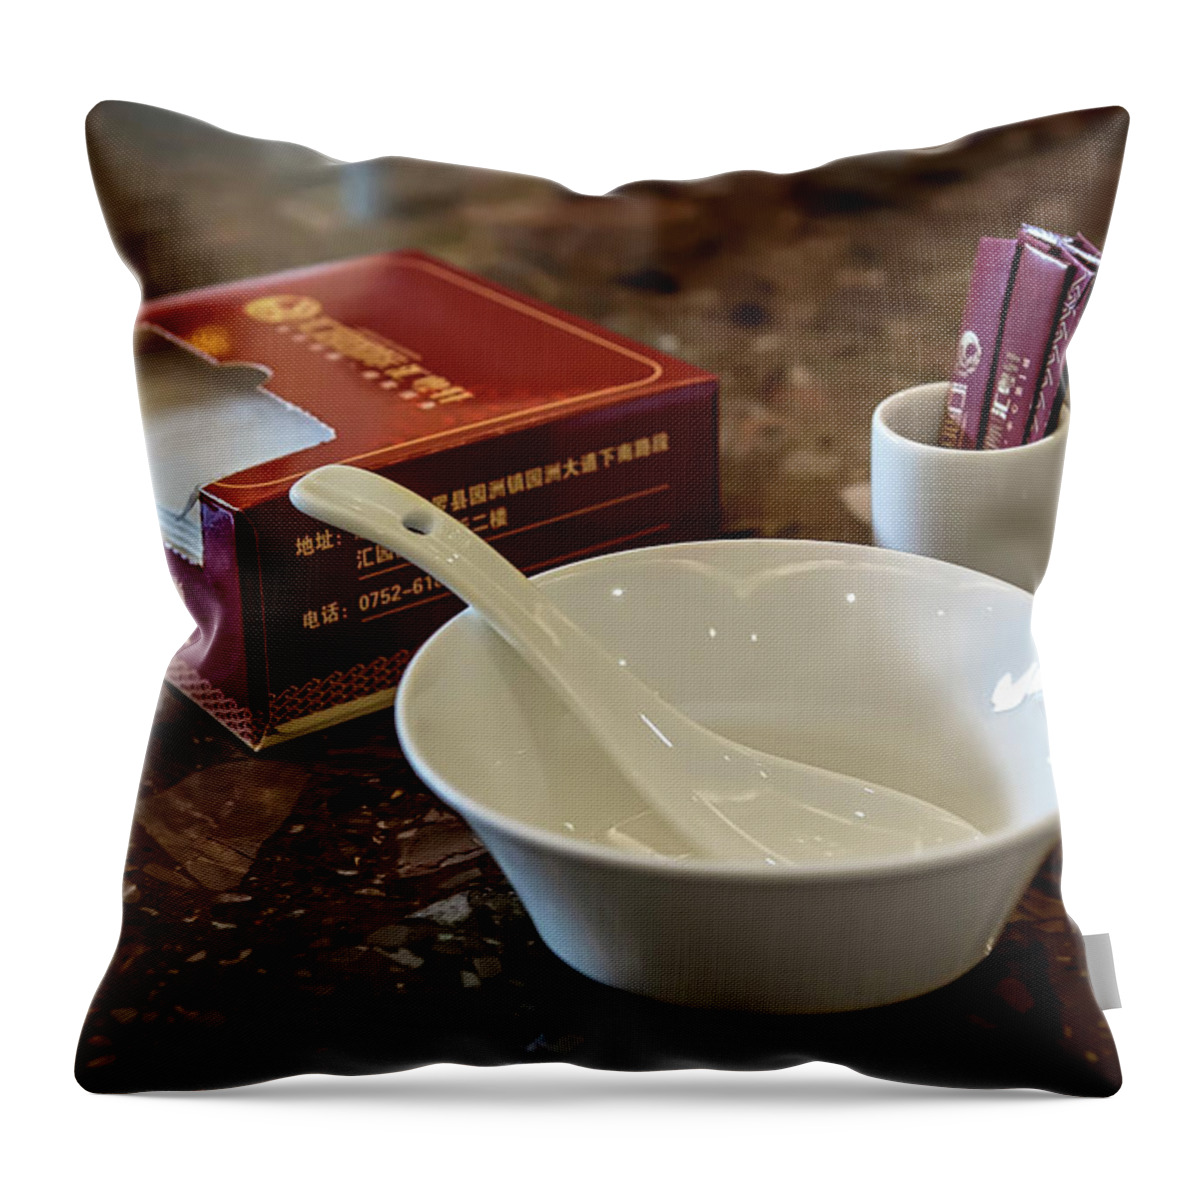 Chinese Restaurant Throw Pillow featuring the photograph Chinese Restaurant Still Life by Endre Balogh